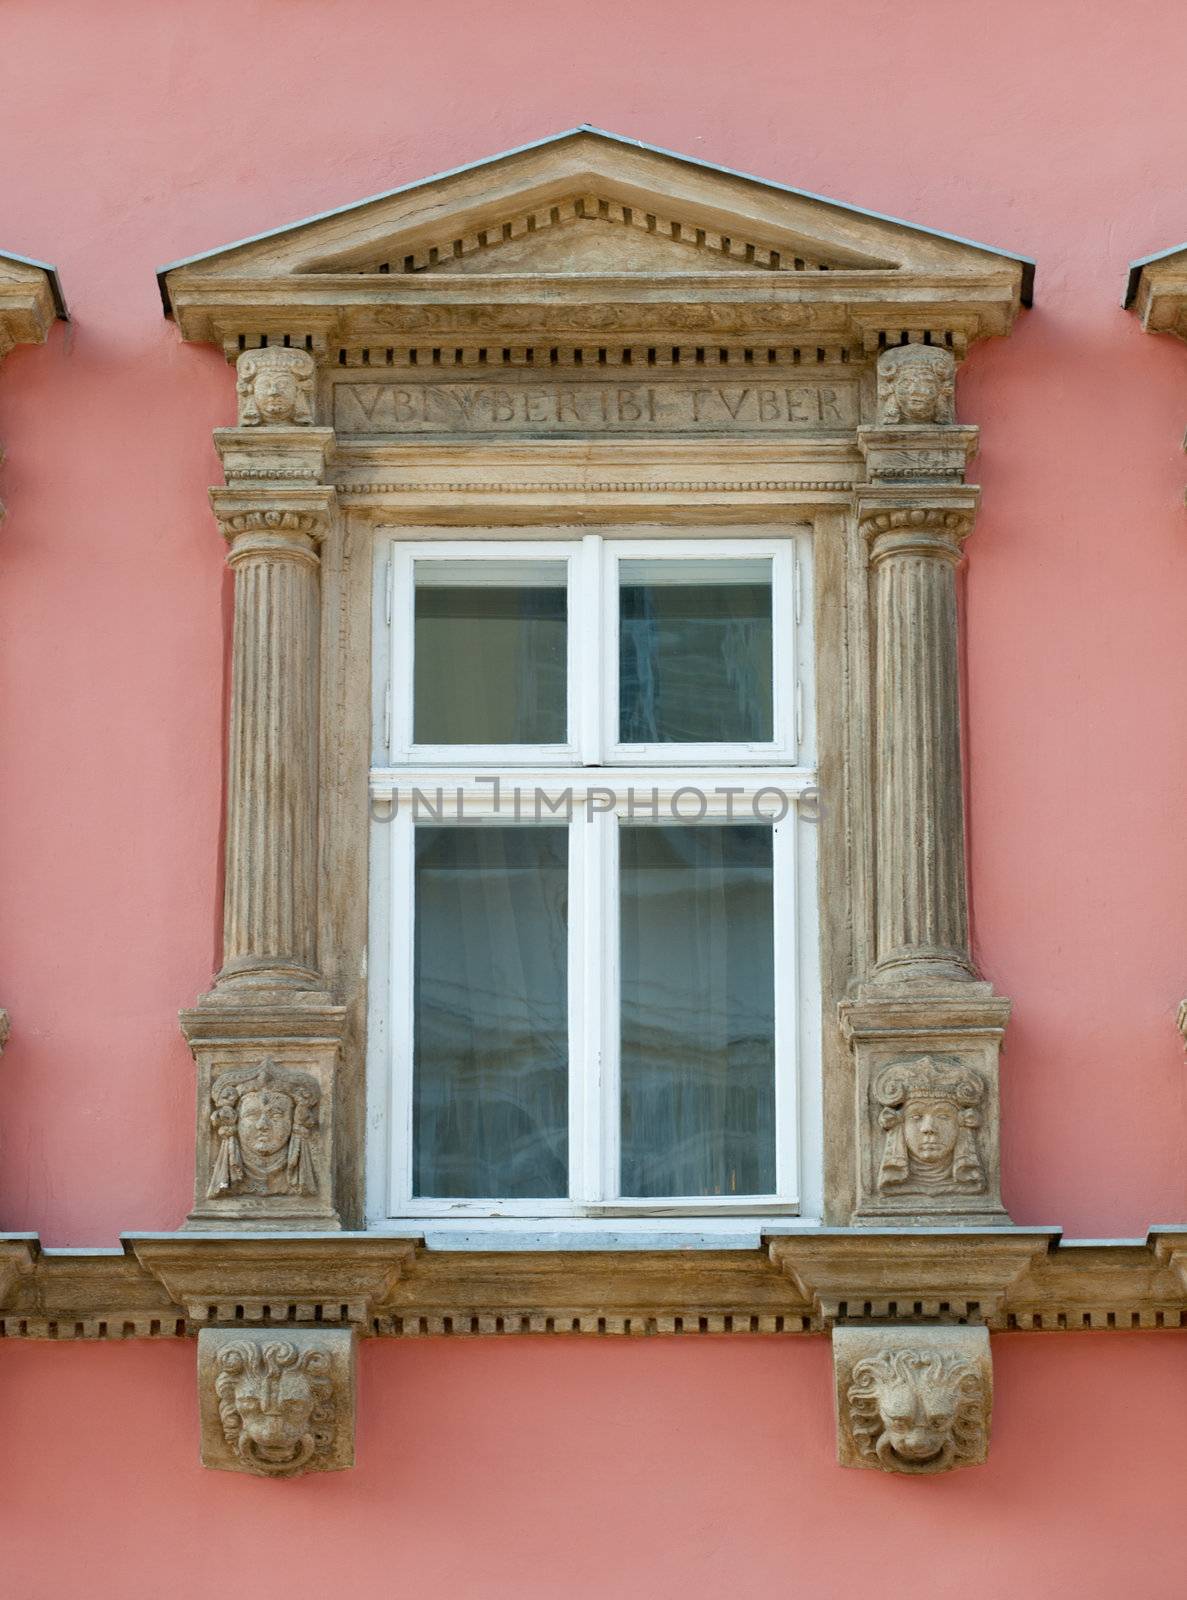 Facade of a building with windows. The building is constructed 1850-1890